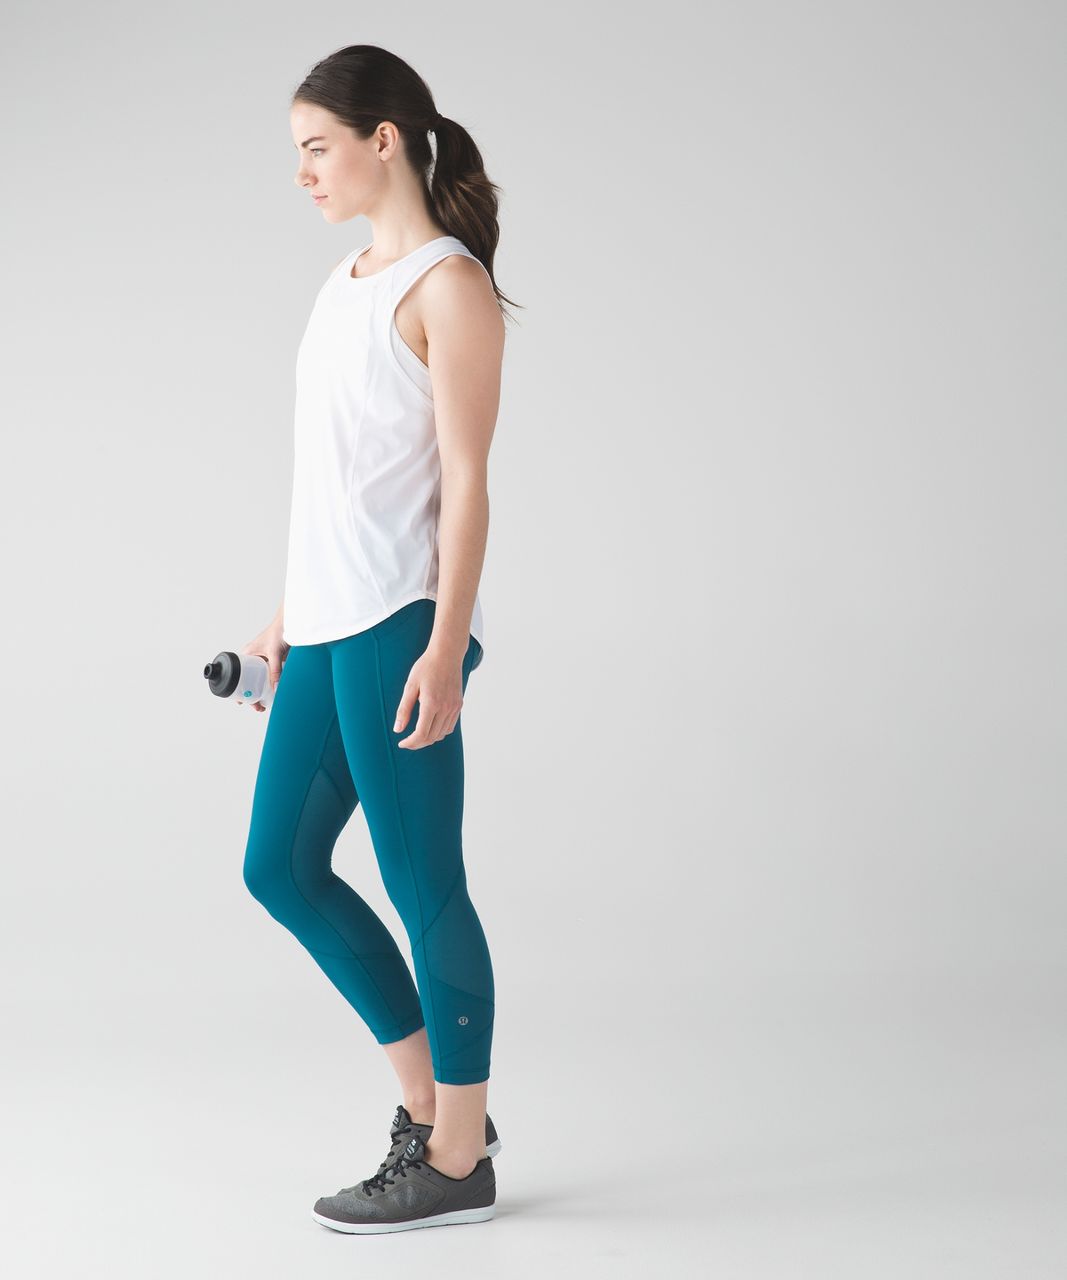 Lululemon Pace Rival Crop - Tofino Teal